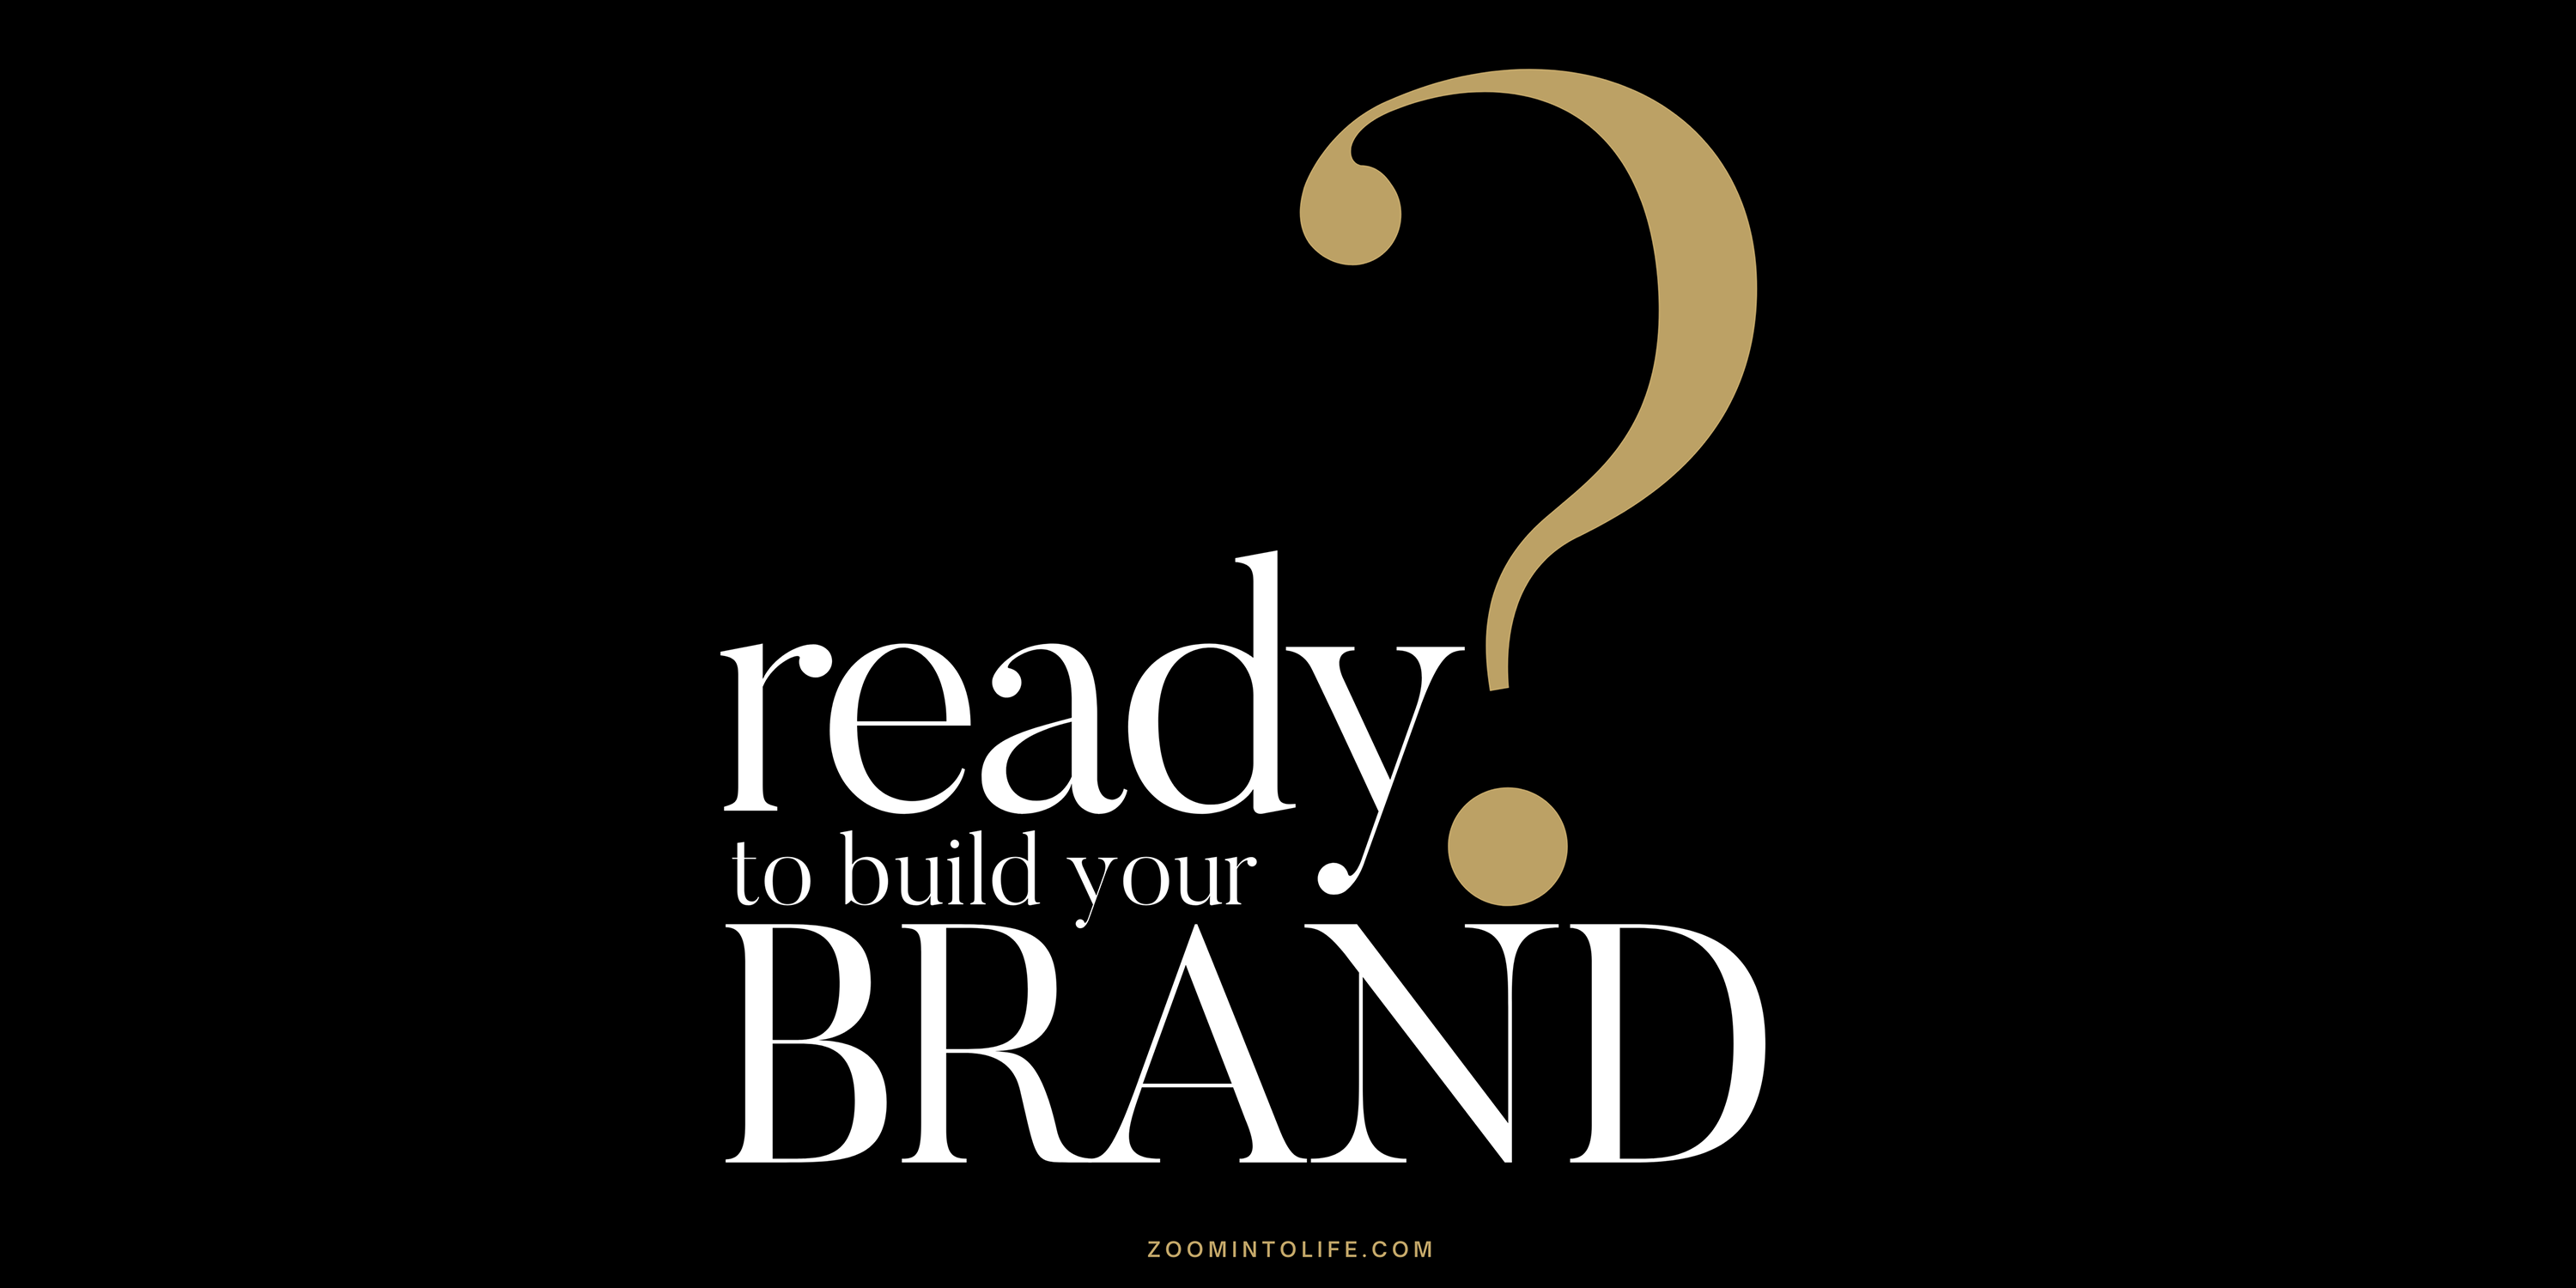 are you ready to build your brand